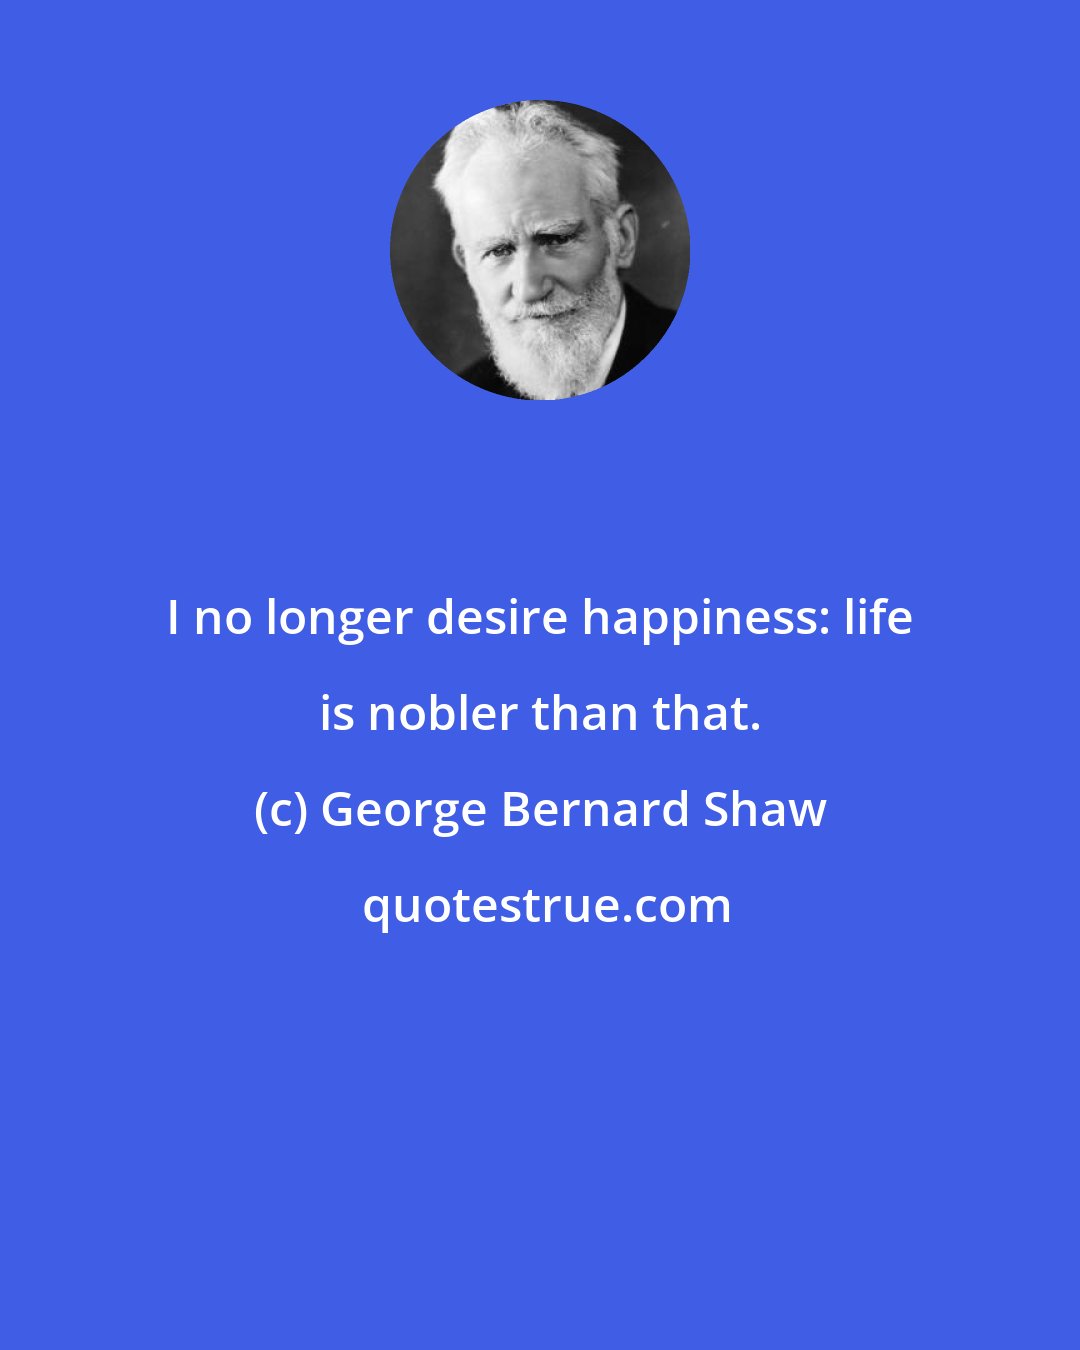 George Bernard Shaw: I no longer desire happiness: life is nobler than that.